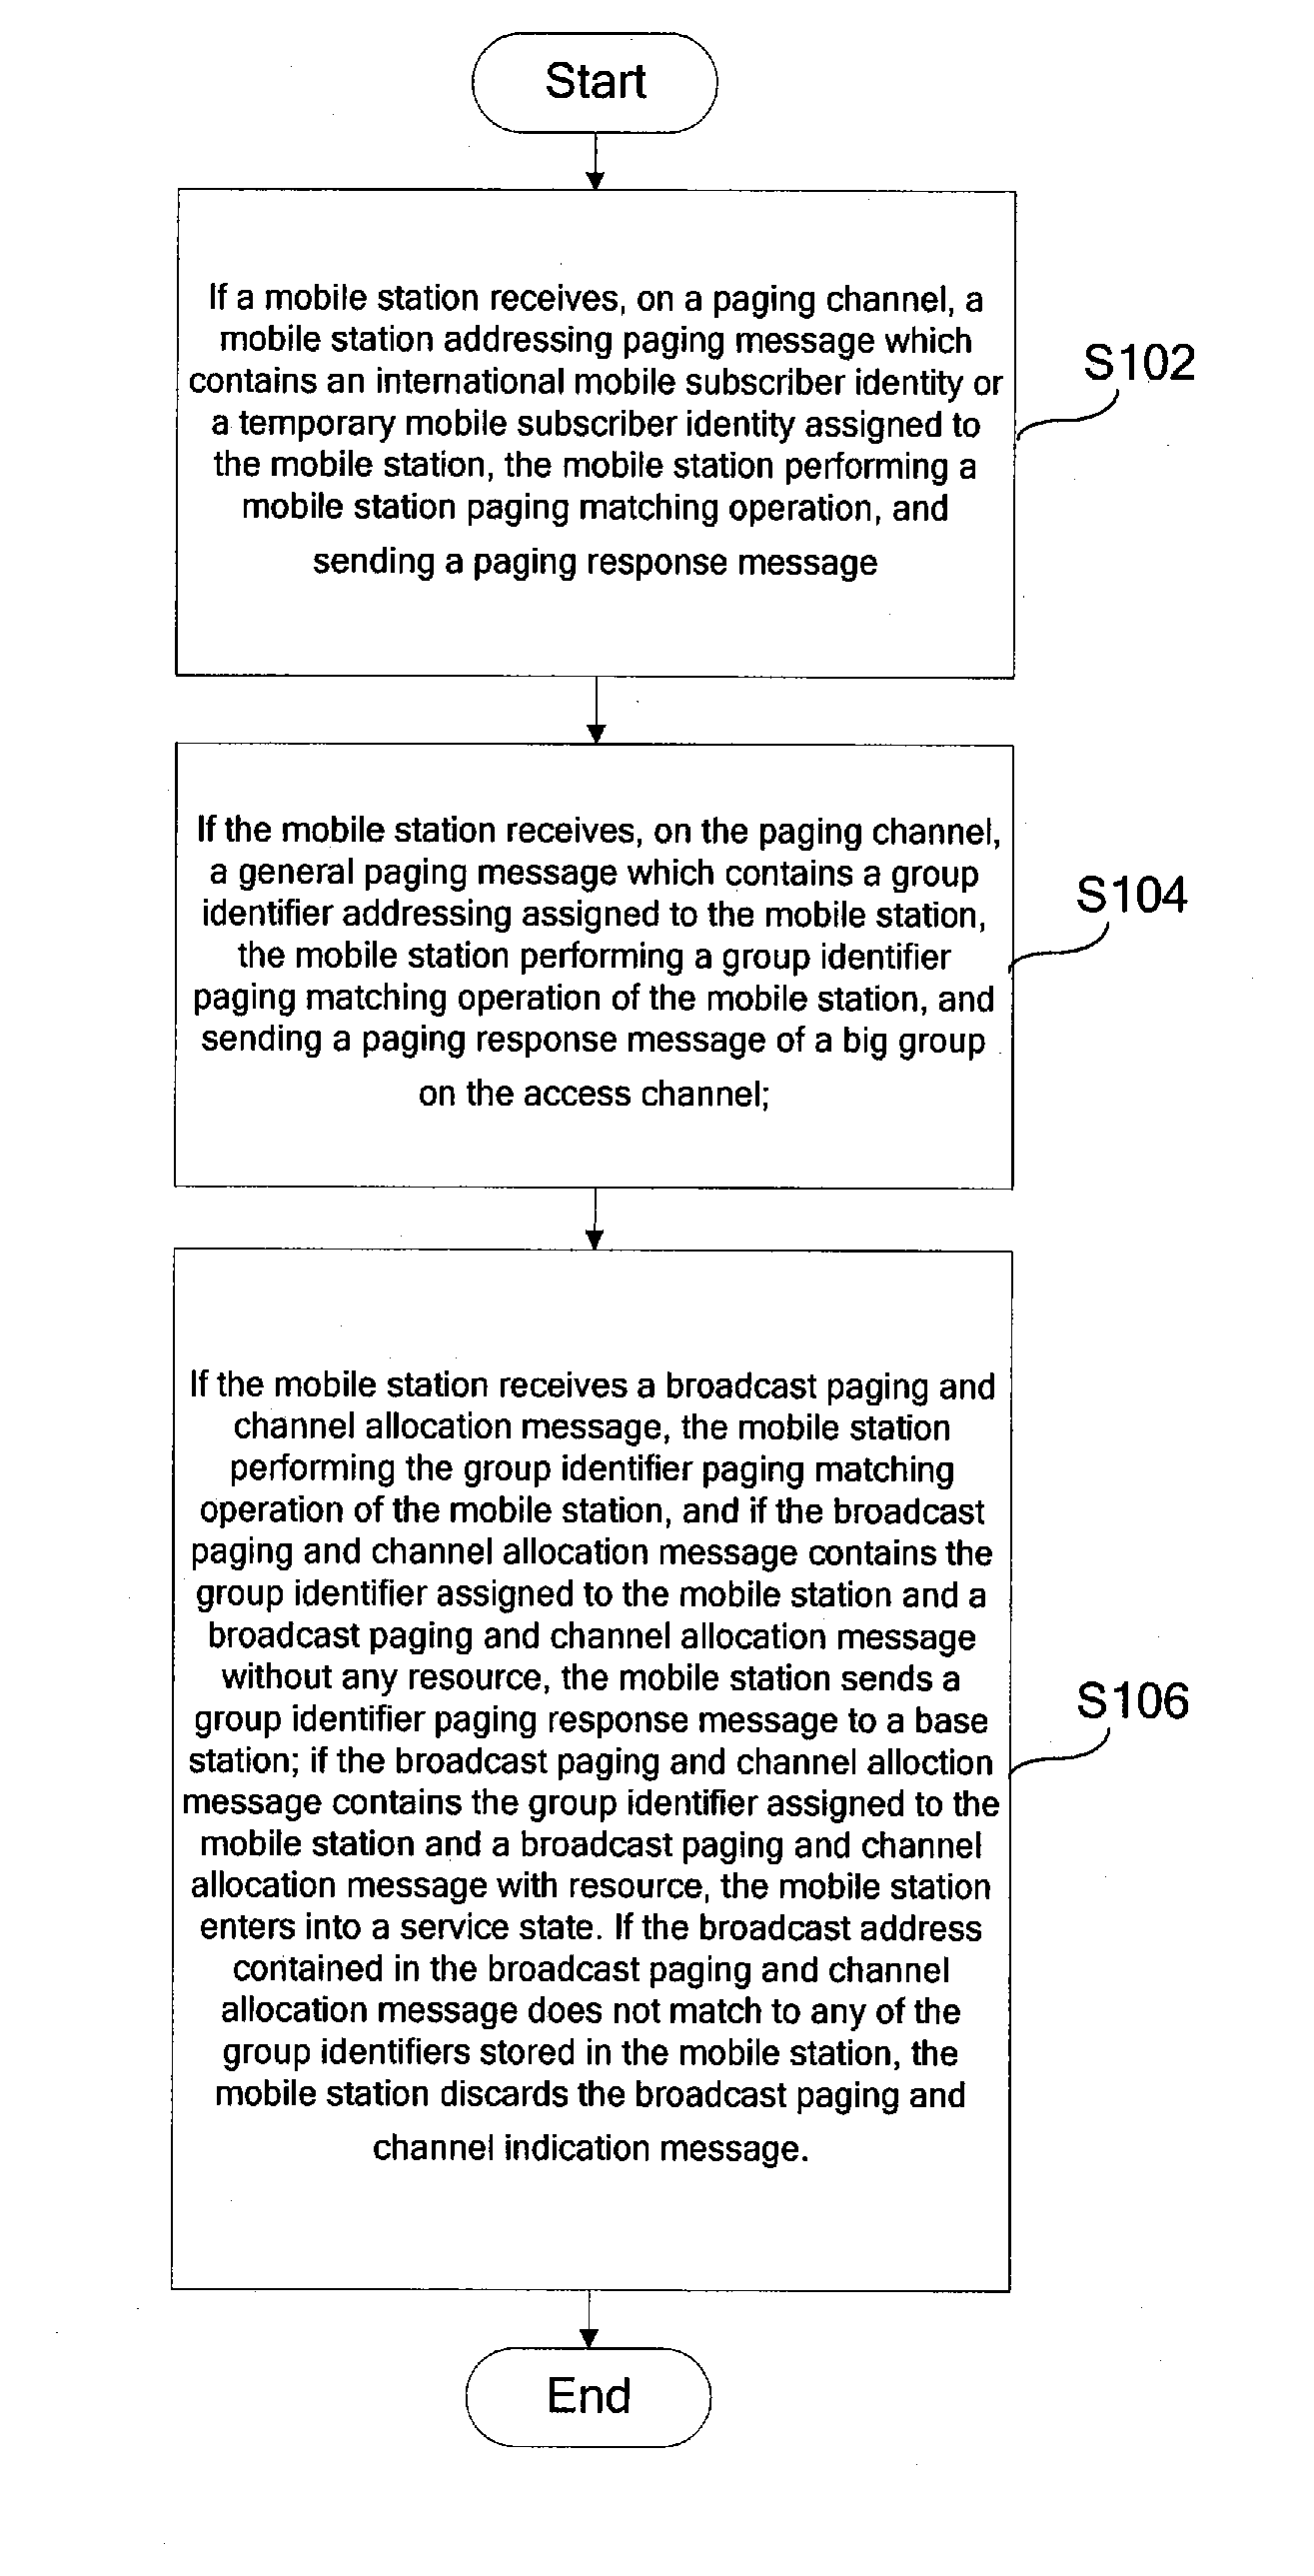 Method for matching group paging of a CDMA trunking system